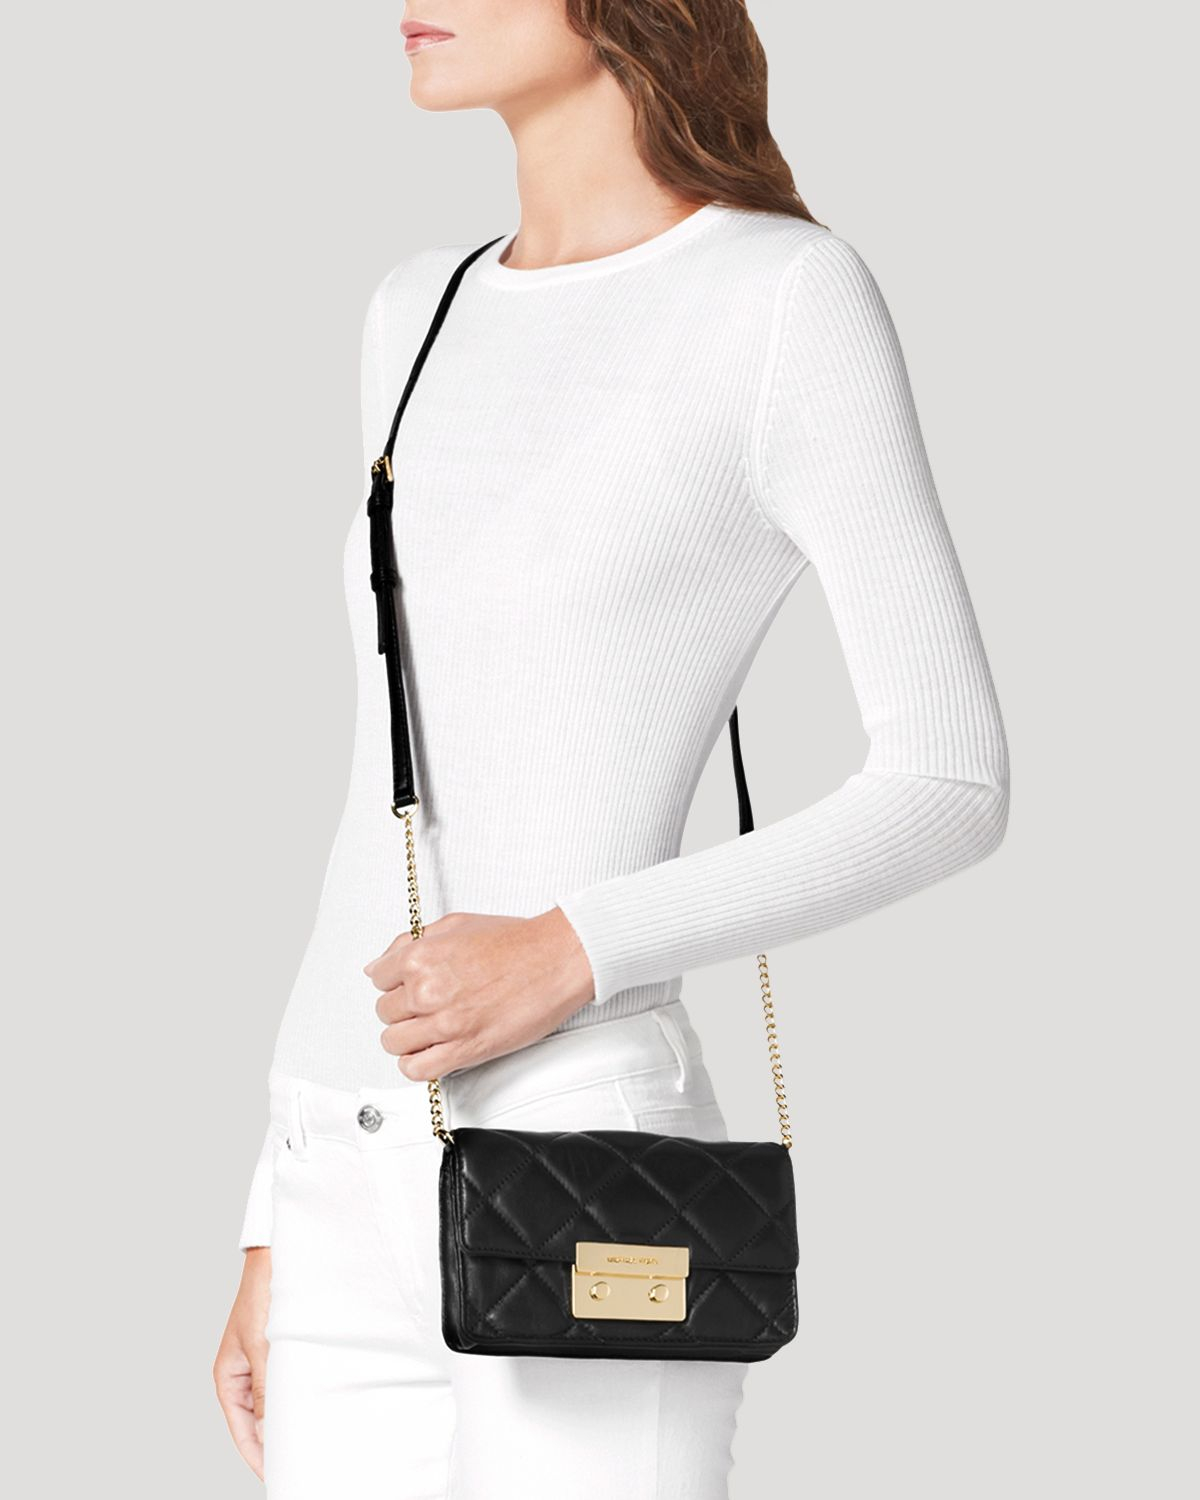 michael kors sloan quilted crossbody